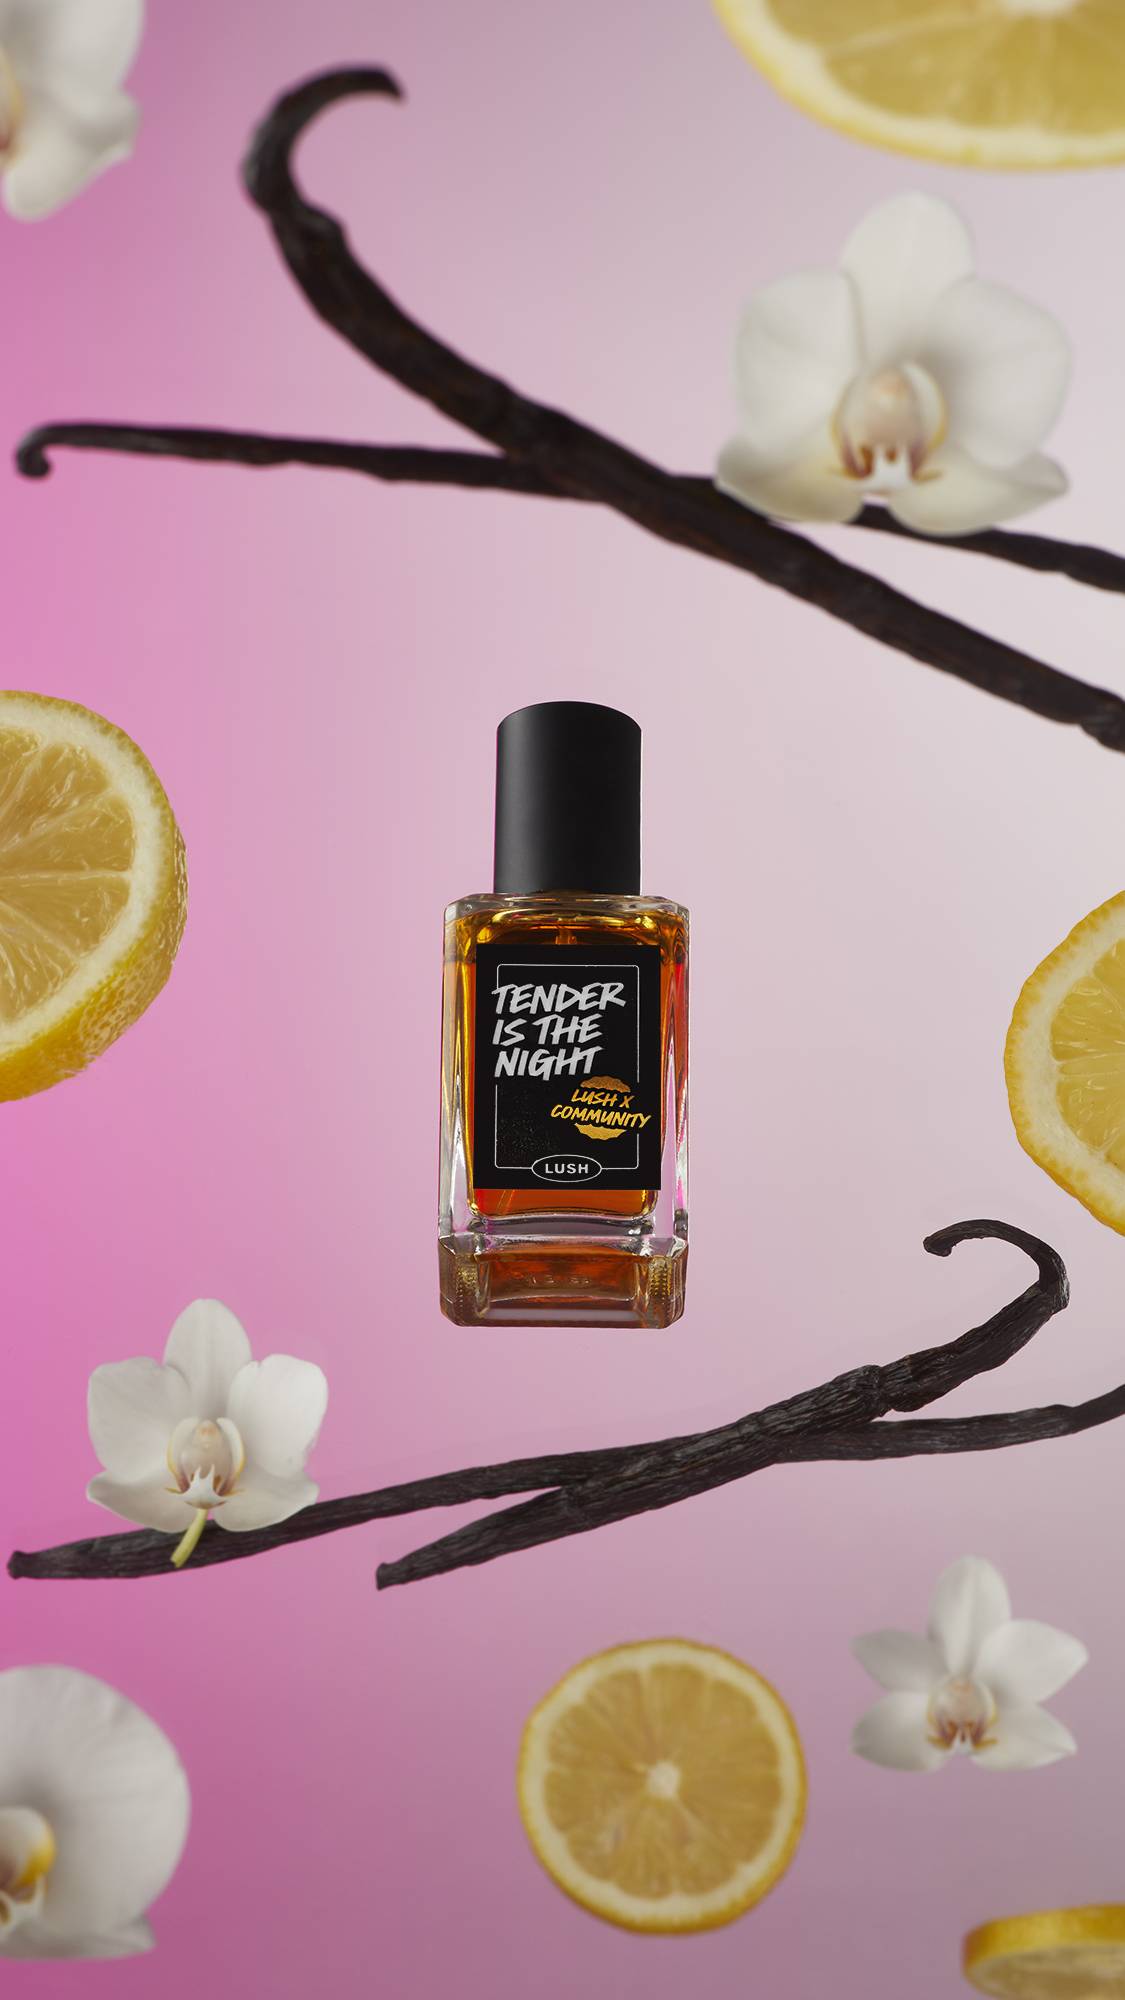 The Tender Is The Night perfume bottle is on a pink and white background surrounded by vanilla pods, flowers and lemon slices.